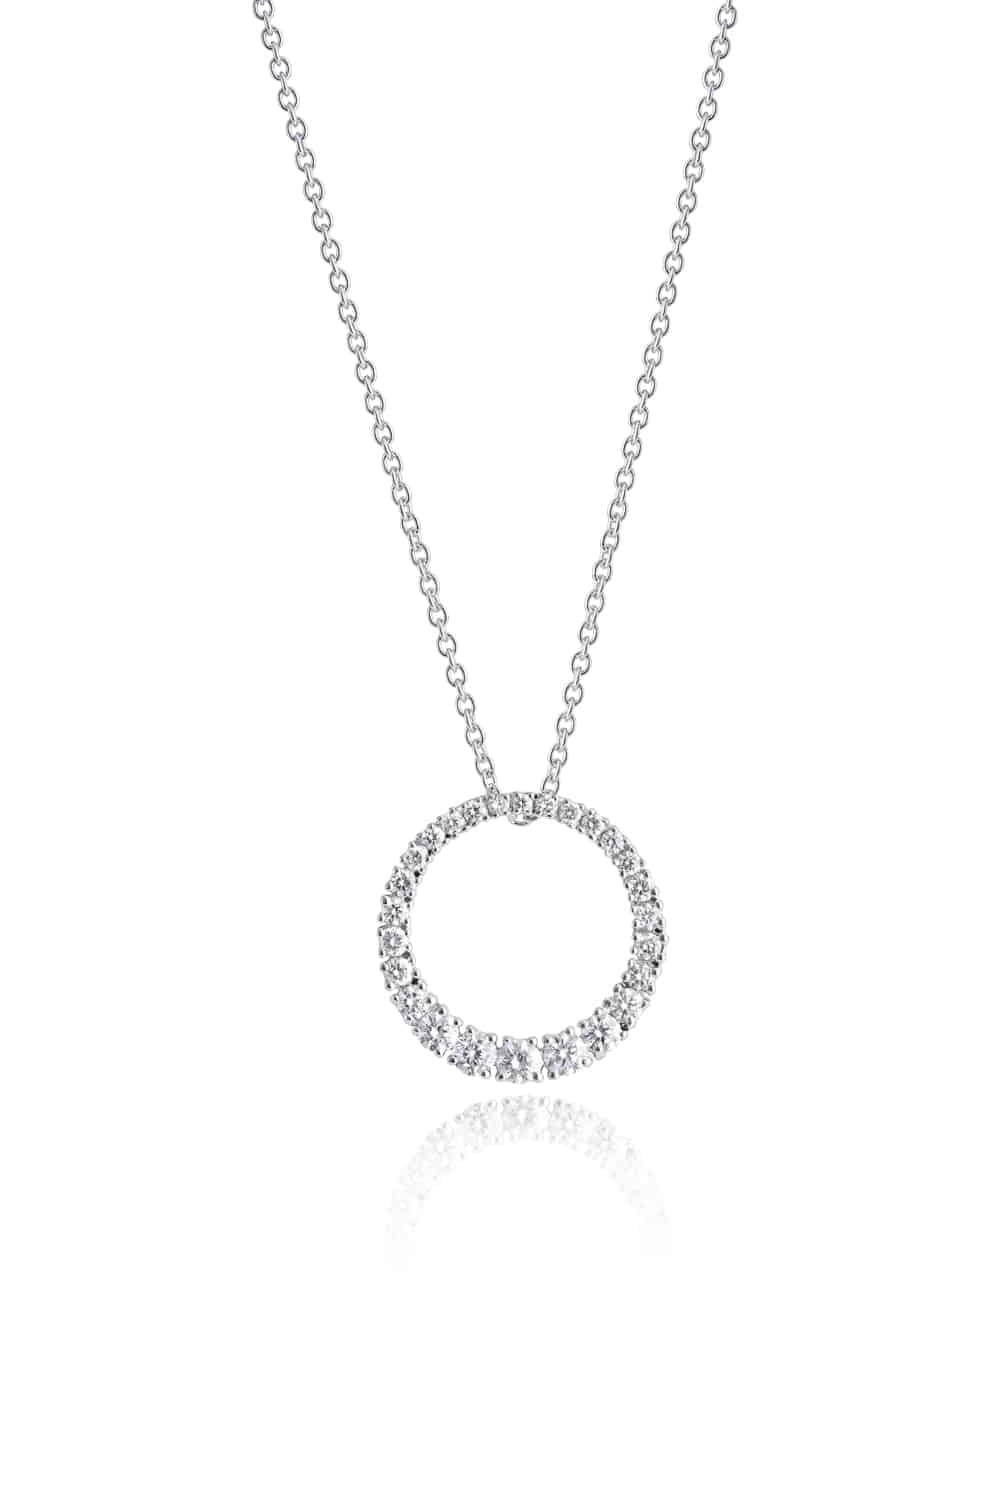 Pendants & Necklaces - Newcastle - Whitakers Jewellers